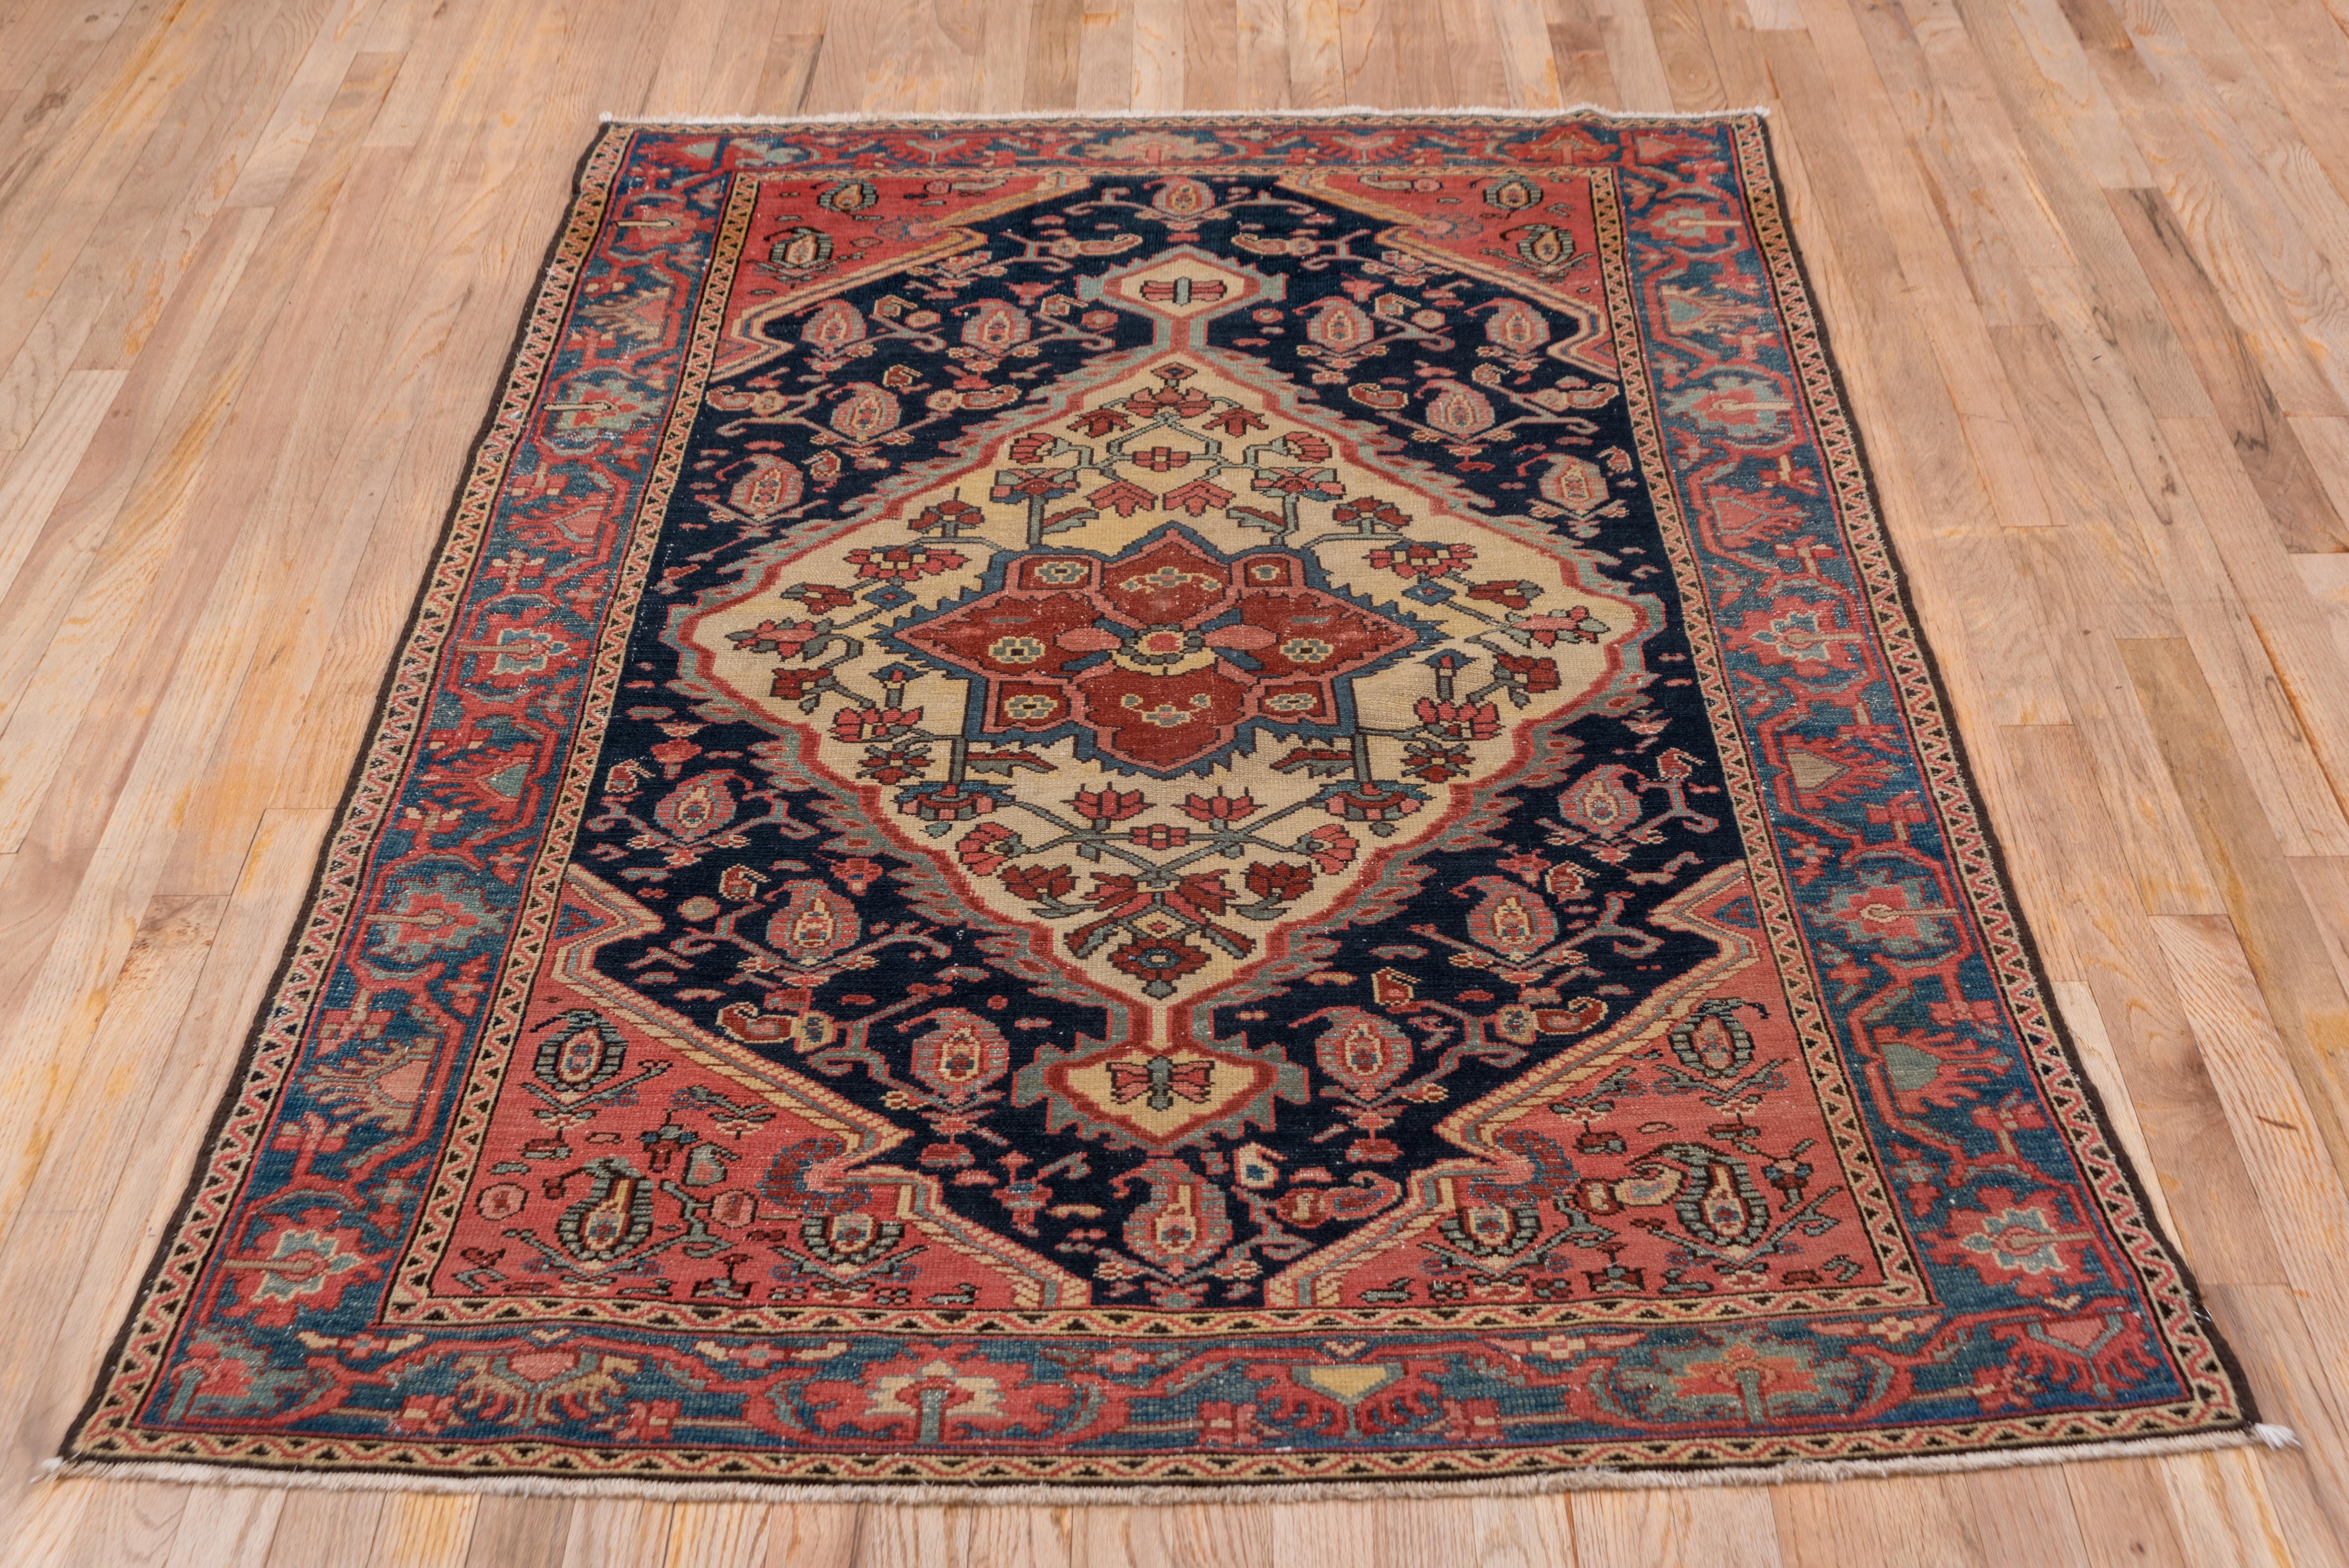 Hand-Knotted 1900s Antique Persian Mishan Malayer Rug, Rose, Navy & Ivory Field, Blue Borders For Sale